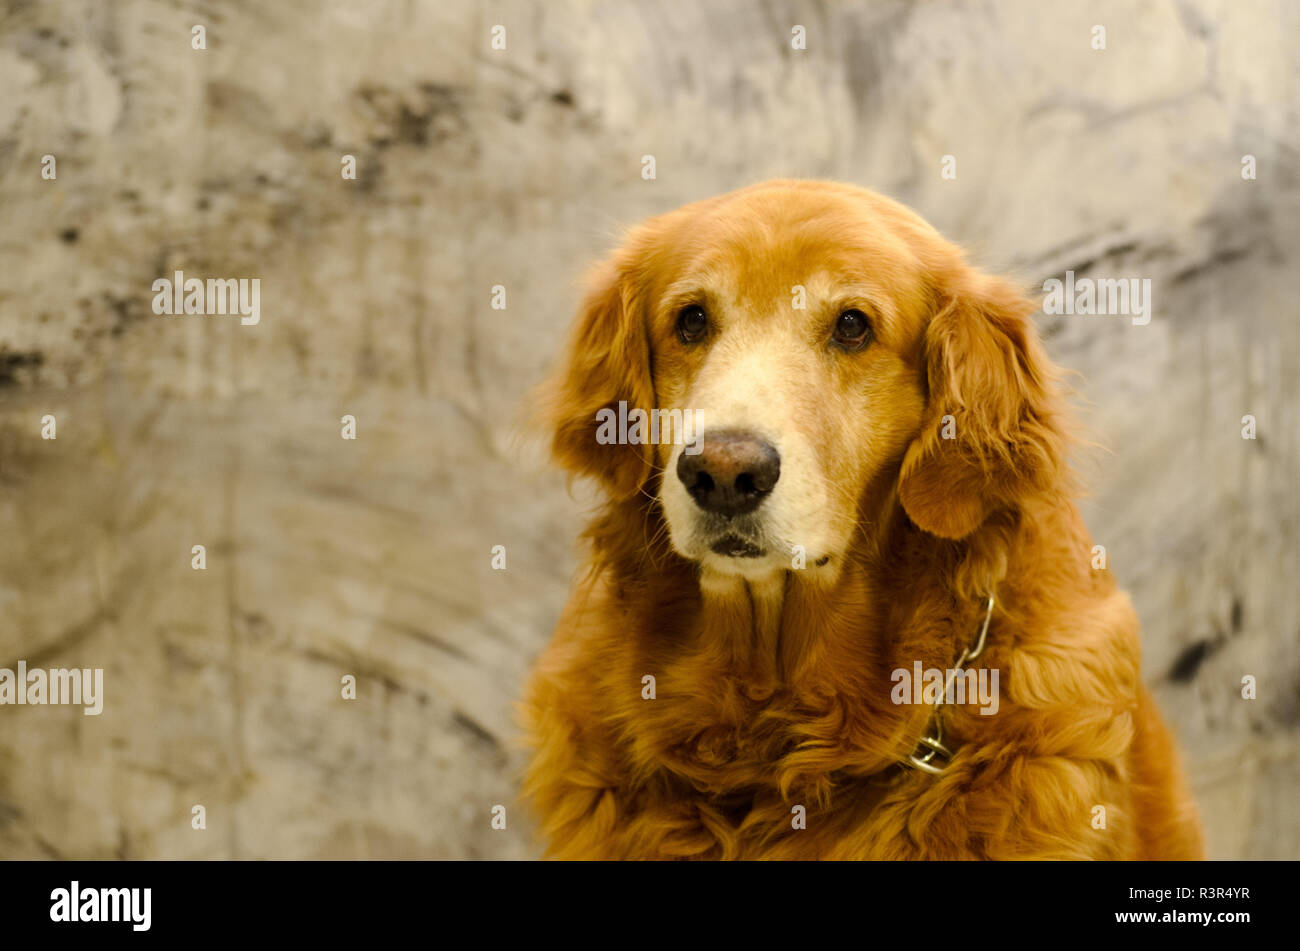 Front view close up picture of a Golden Retriever dog breed sitting in front of isolated studio on gray background Stock Photo